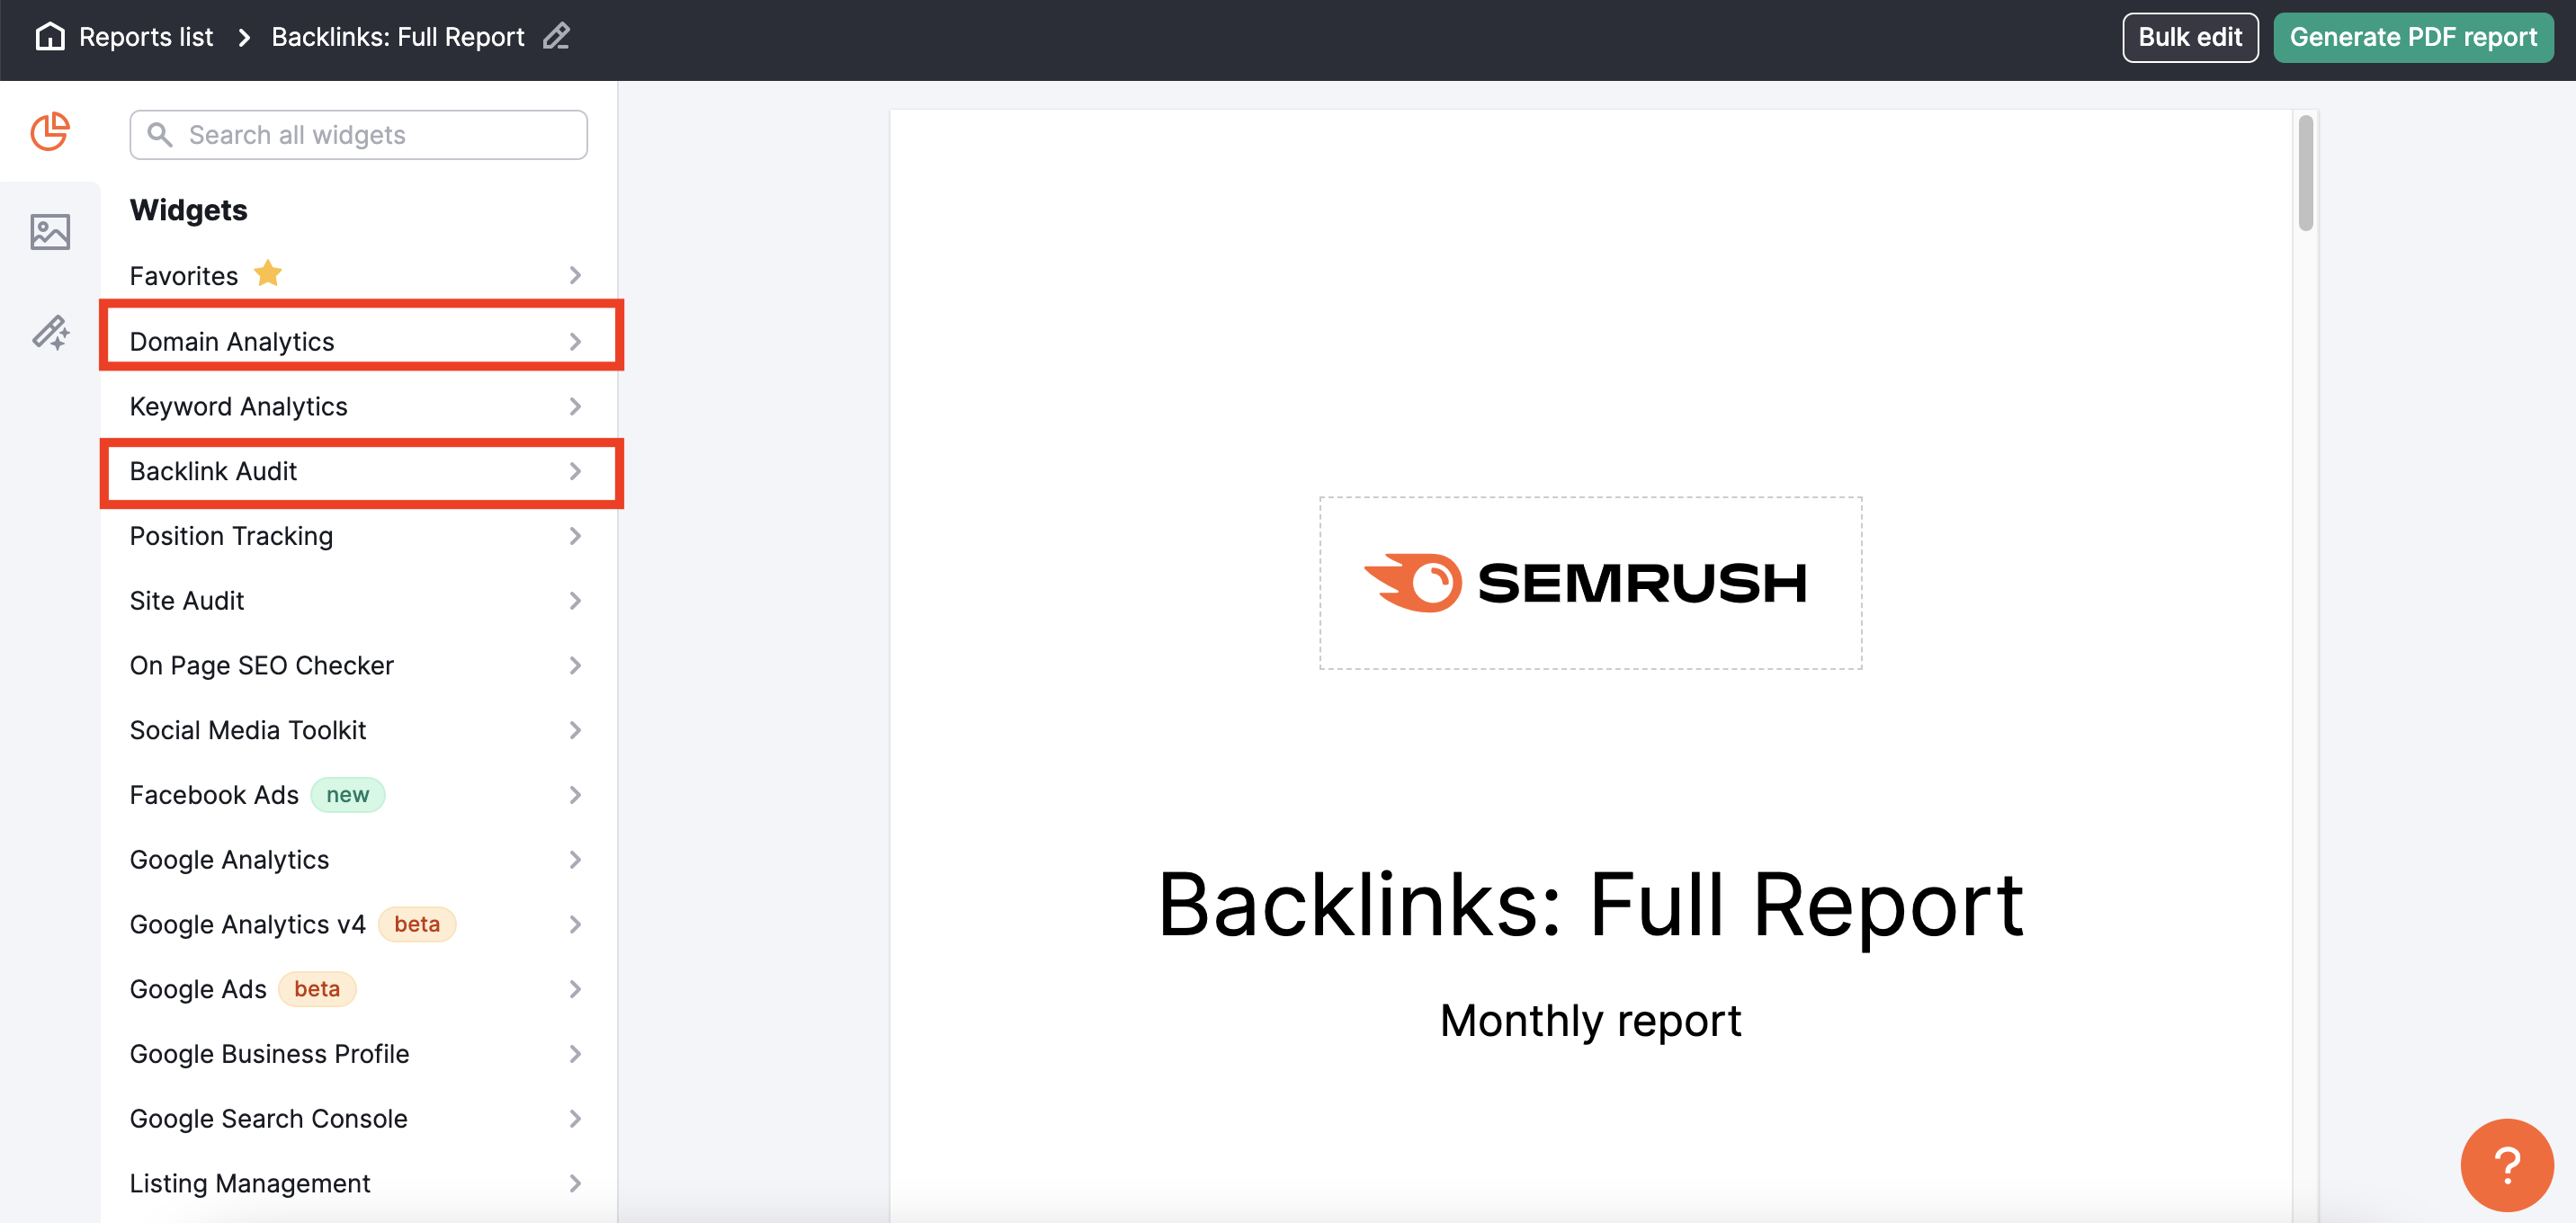 Backlinks in My Reports